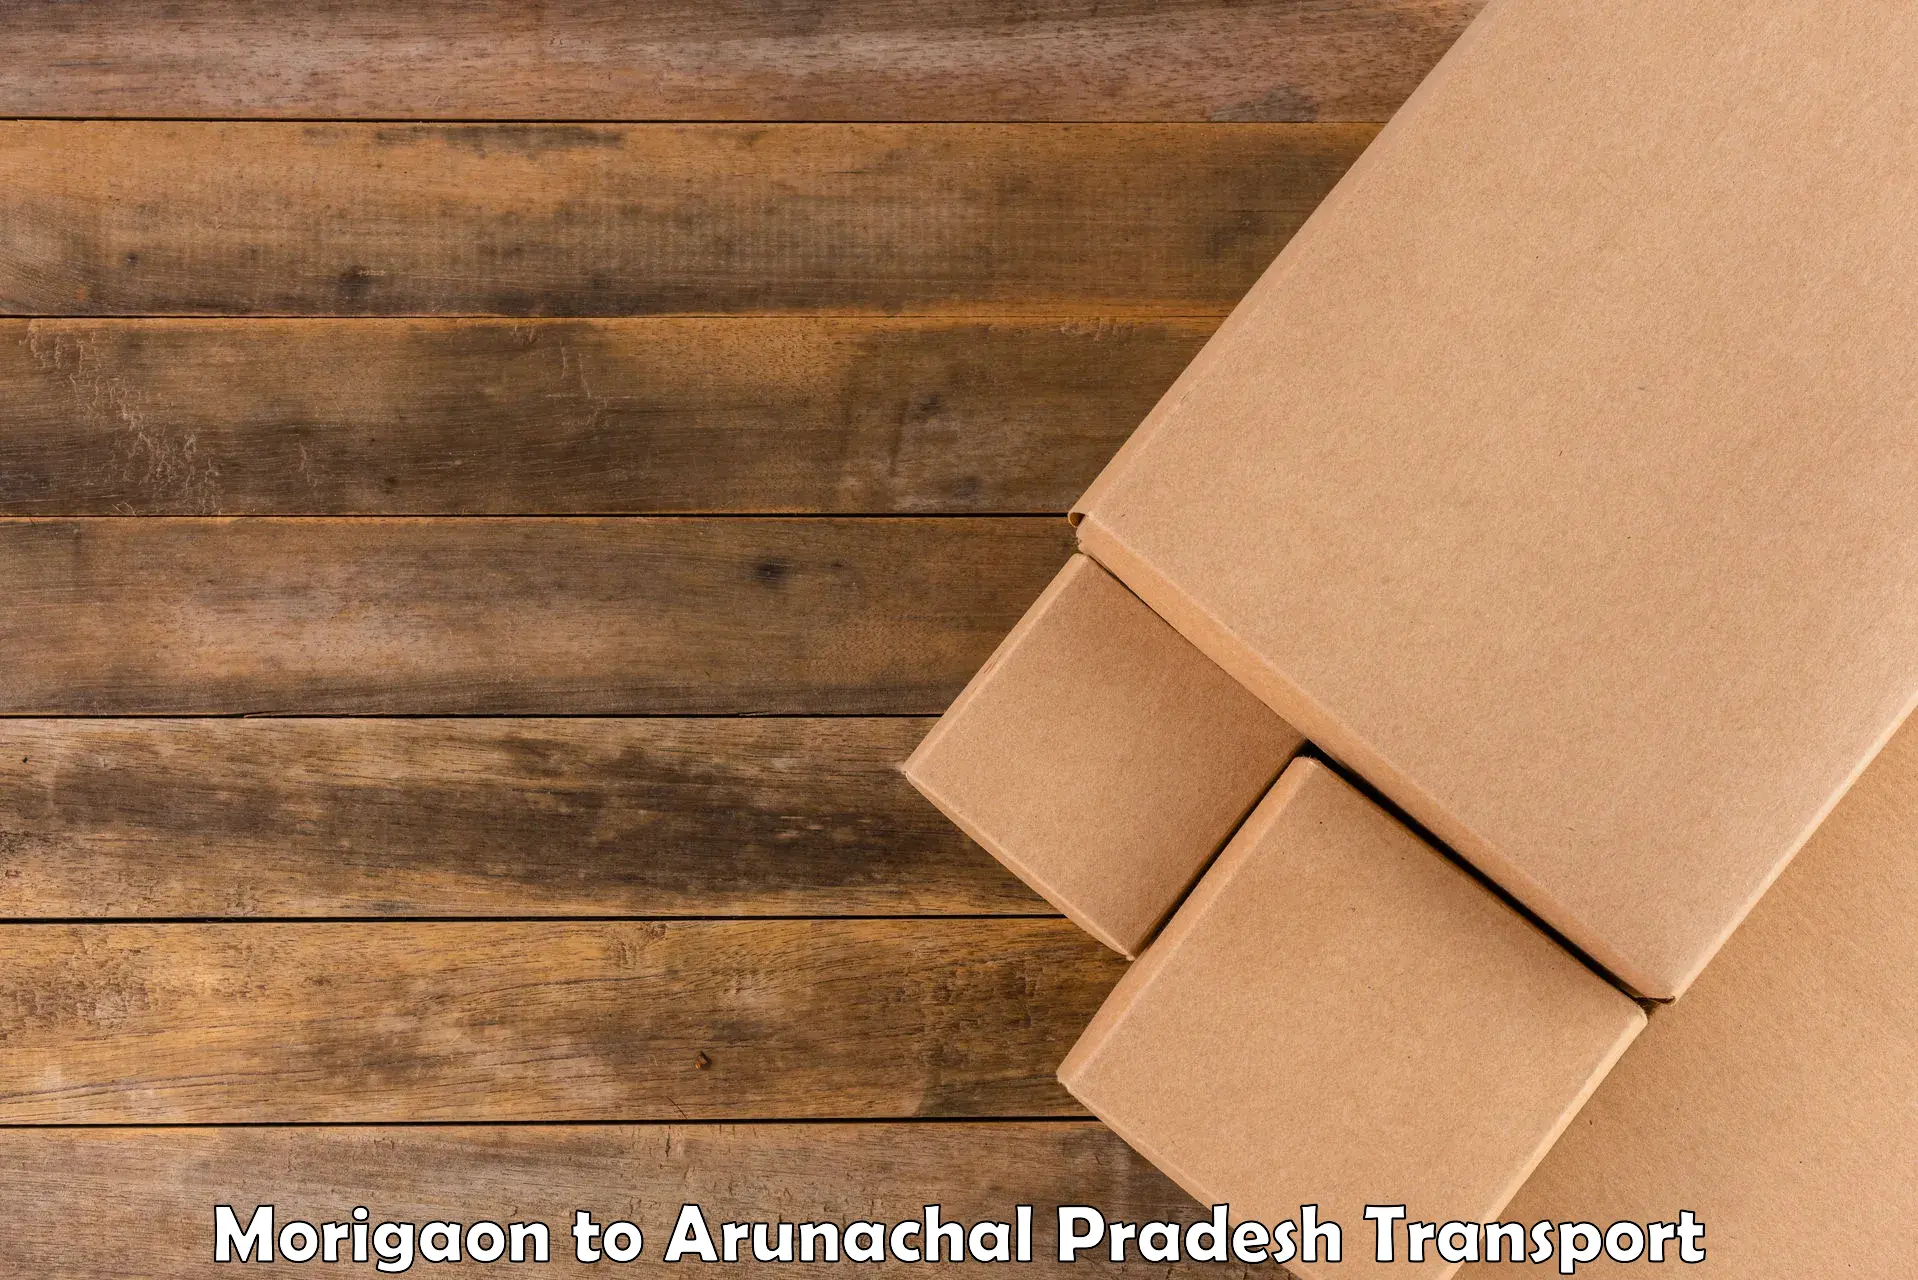 Truck transport companies in India Morigaon to Likabali